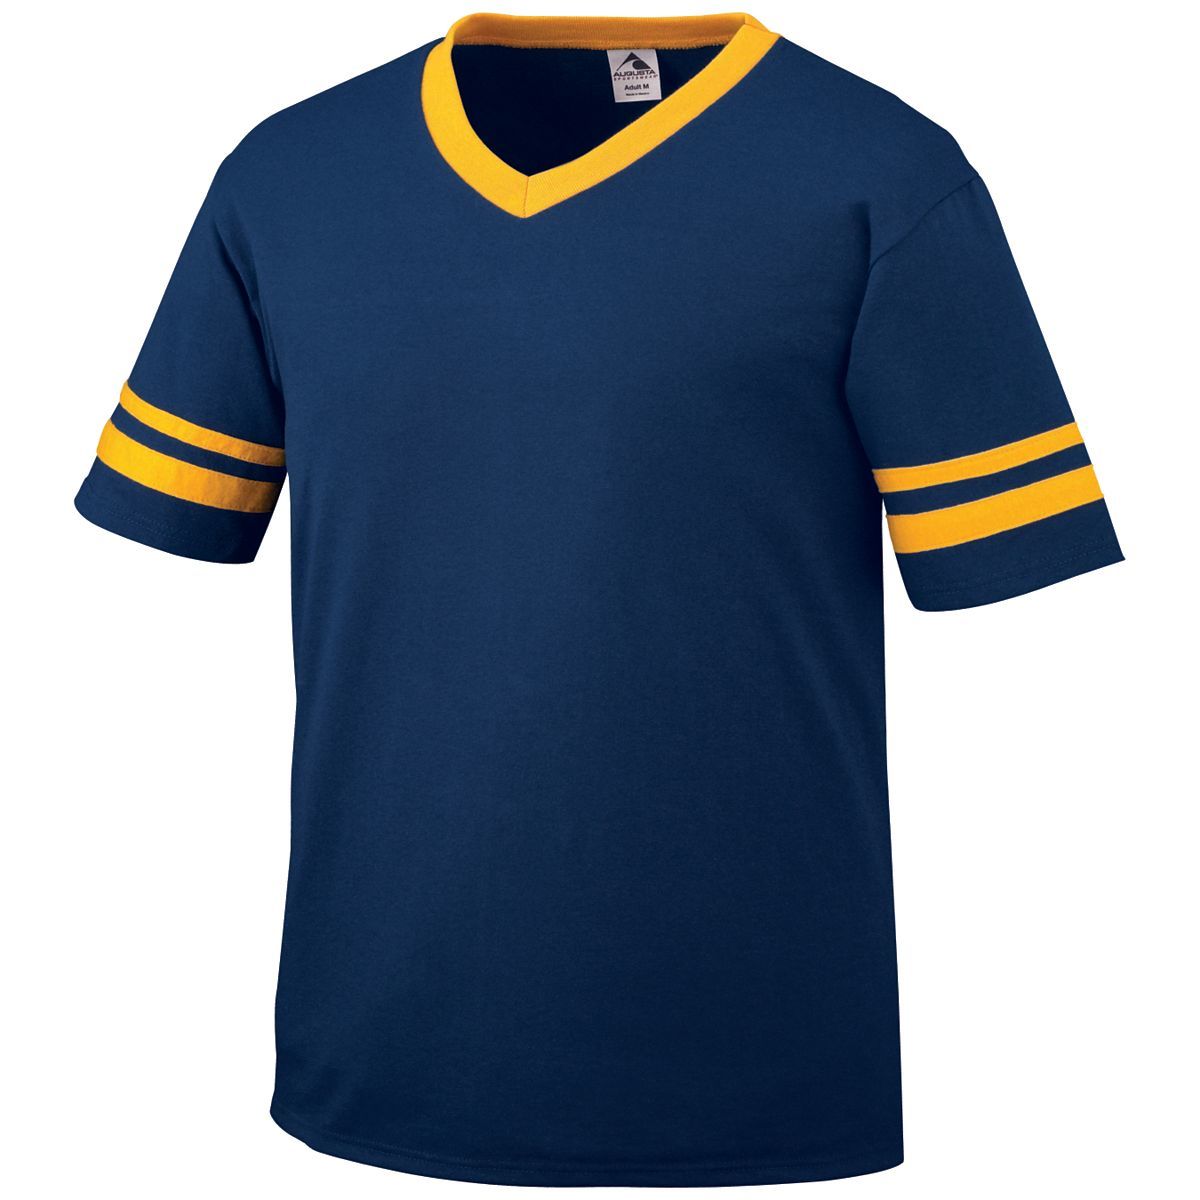 Augusta Sportswear Youth Sleeve Stripe Jersey in Navy/Gold  -Part of the Youth, Youth-Jersey, Augusta-Products, Shirts product lines at KanaleyCreations.com